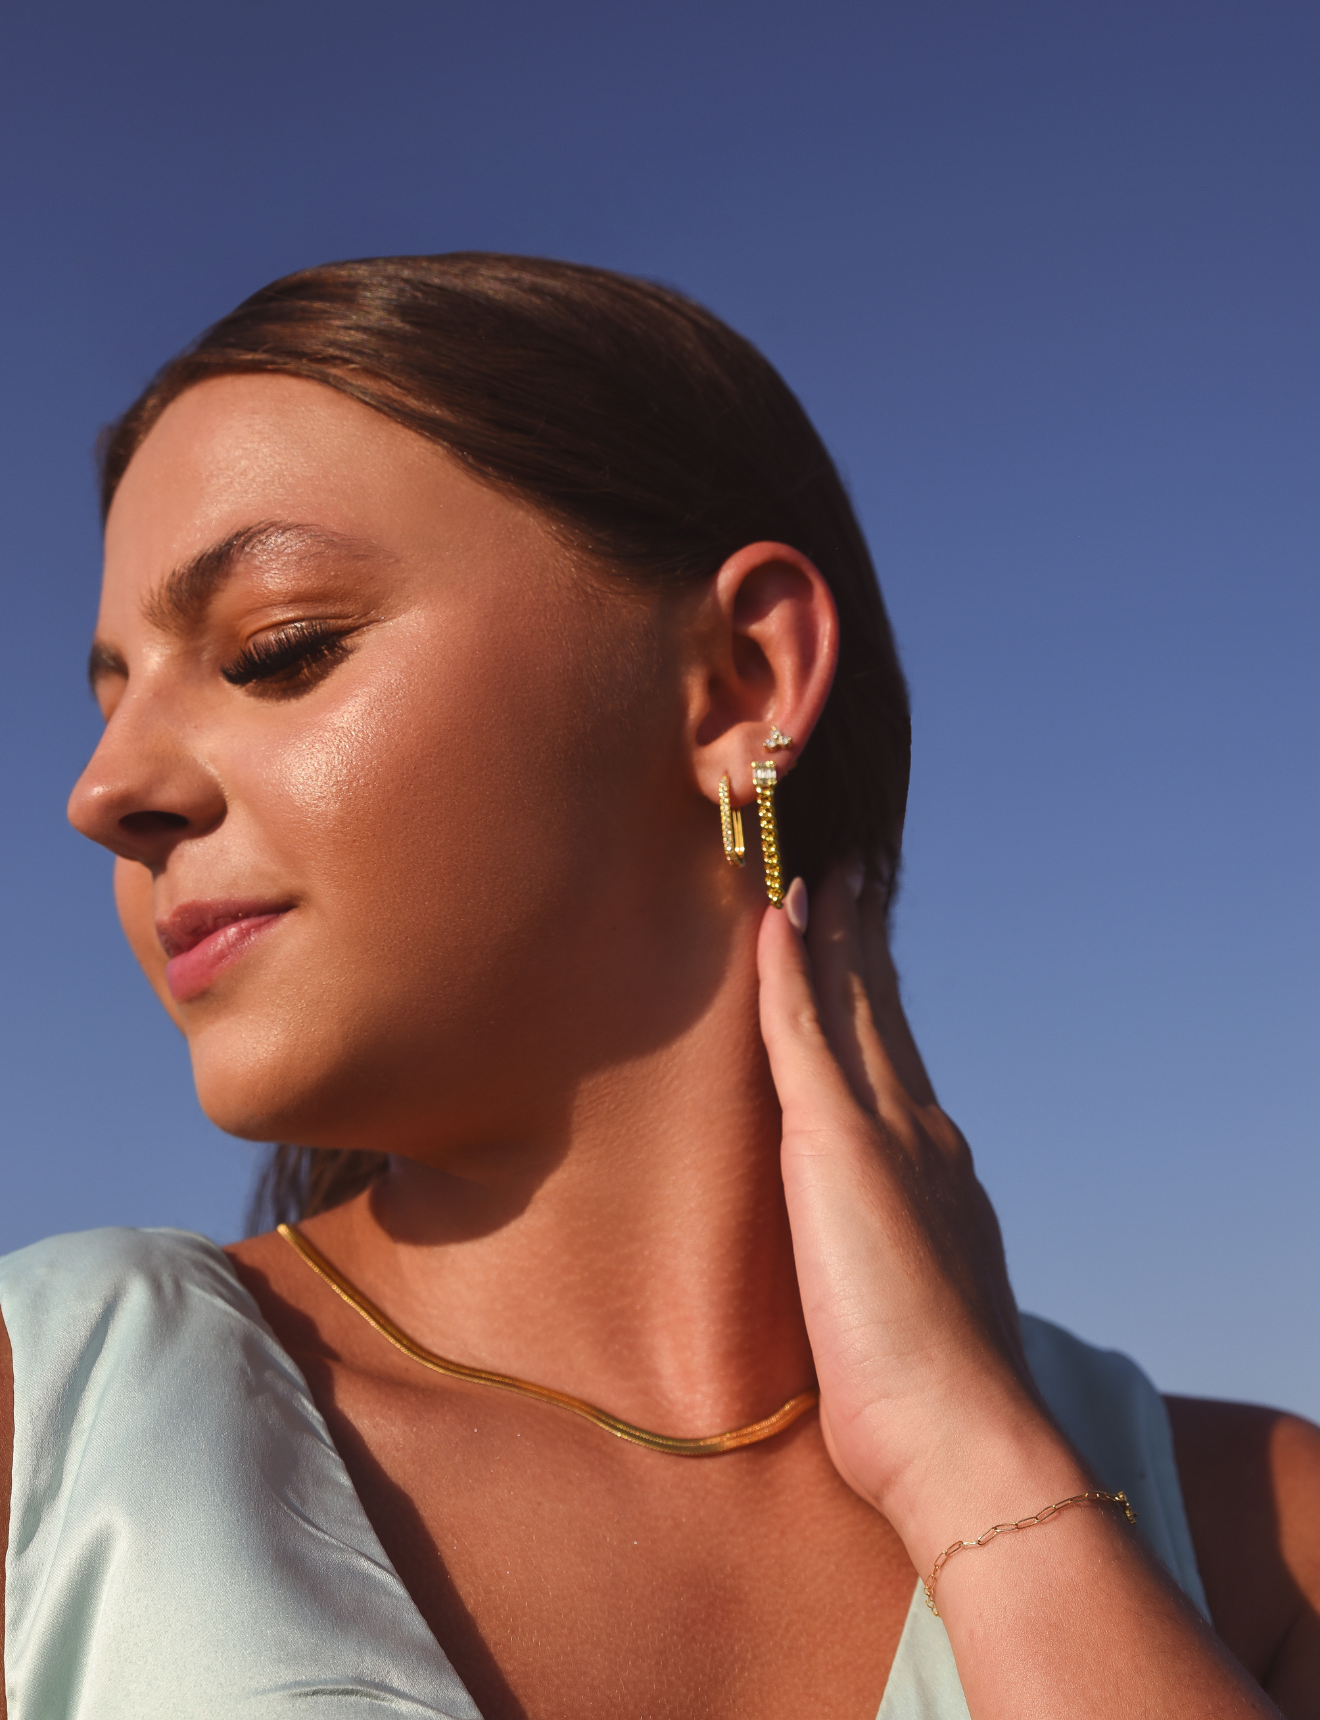 Burdlife Model wearing 3 earrings including the Luxe Oval Hoops, the Refined Single Chain Earring and the Modish Triple Crystal Studs. 